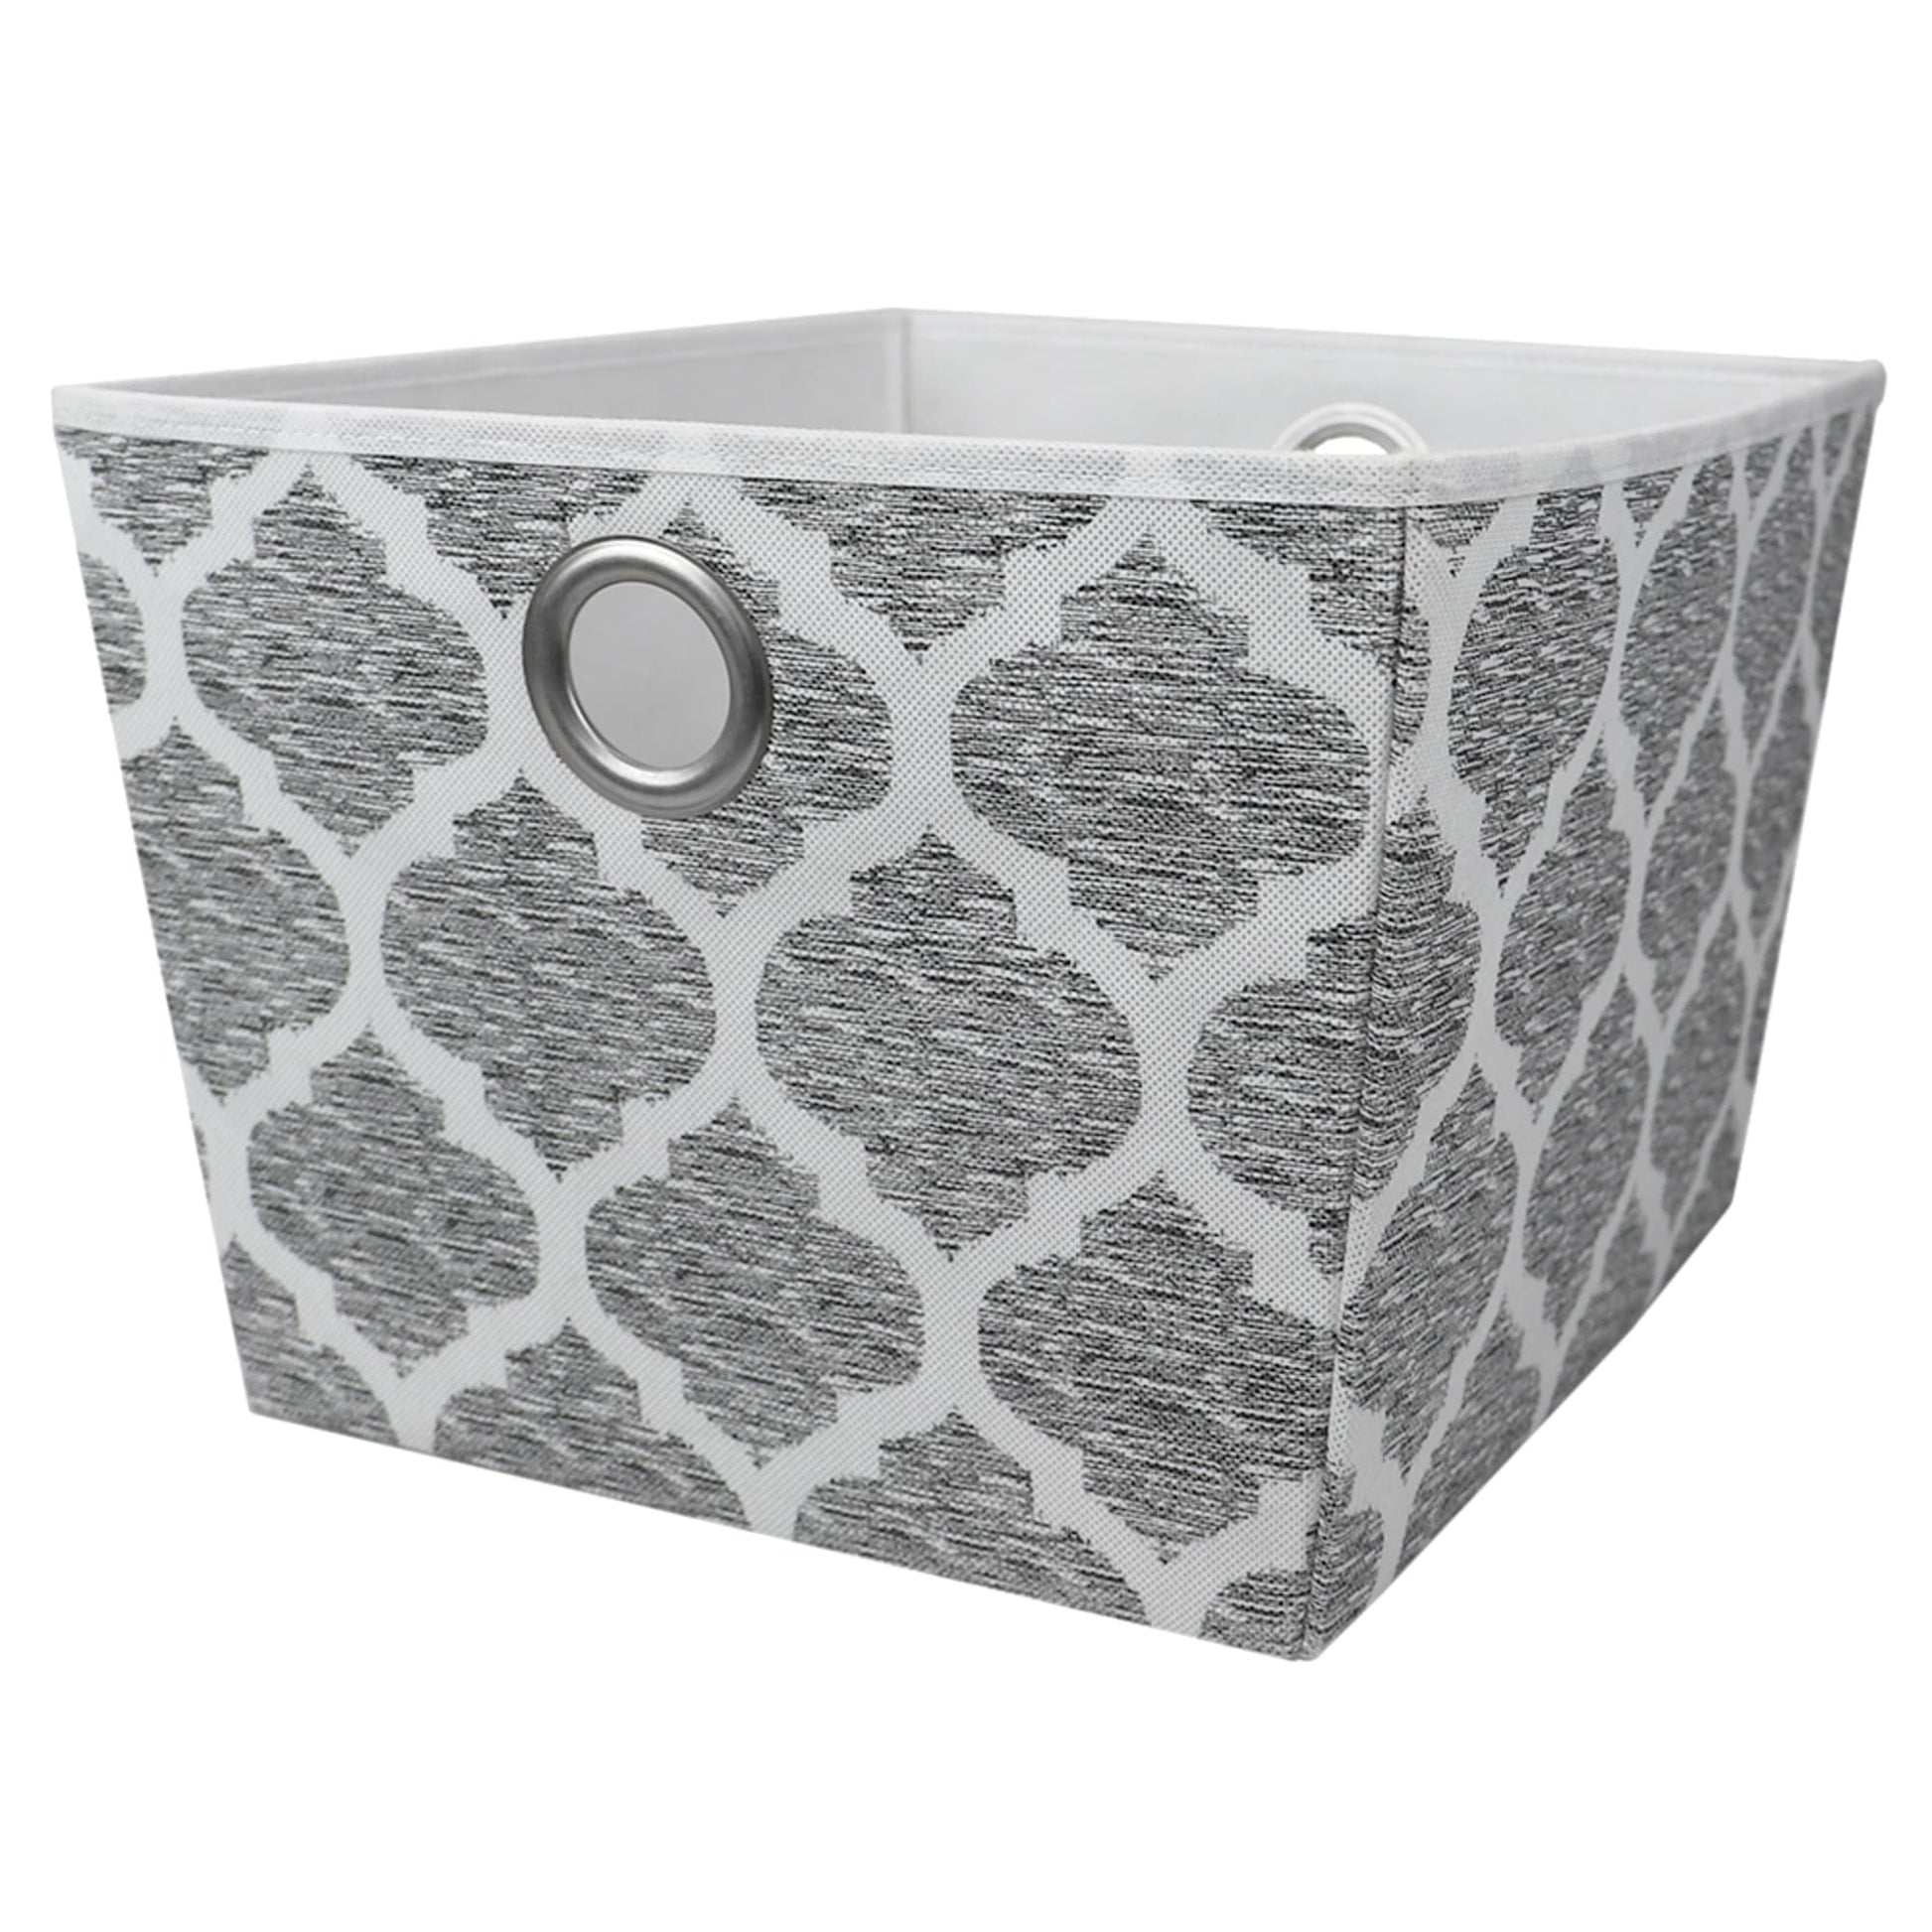 White Y-Weave Storage Basket, Large, Sold by at Home